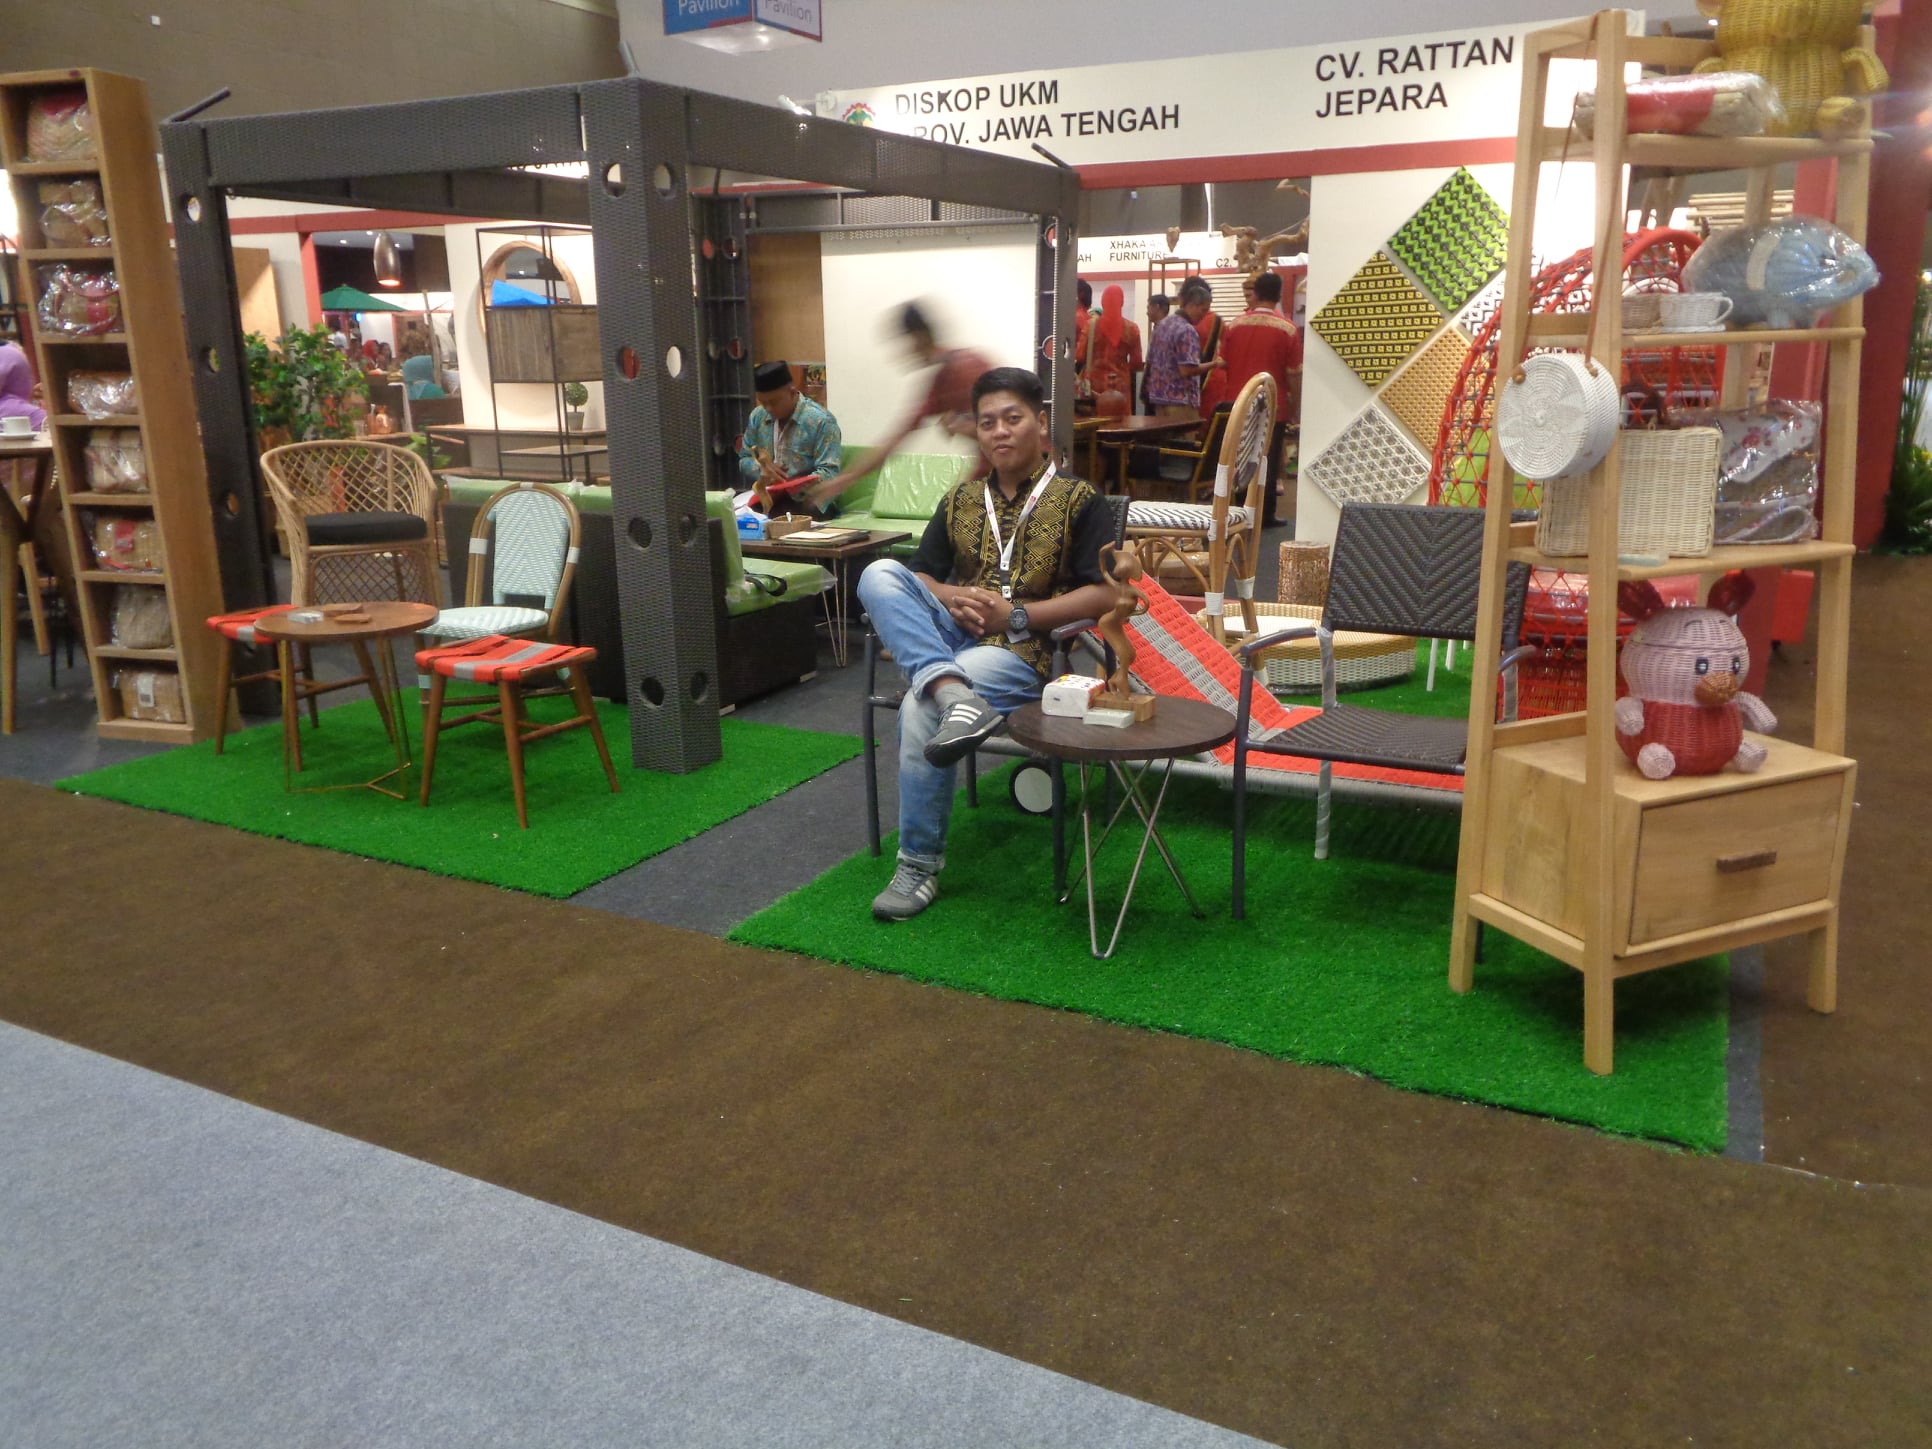 Indonesia International Furniture Expo (IFEX) is an International Trade Event that exhibits quality Furniture & Craft products by Indonesian Craftsmen.